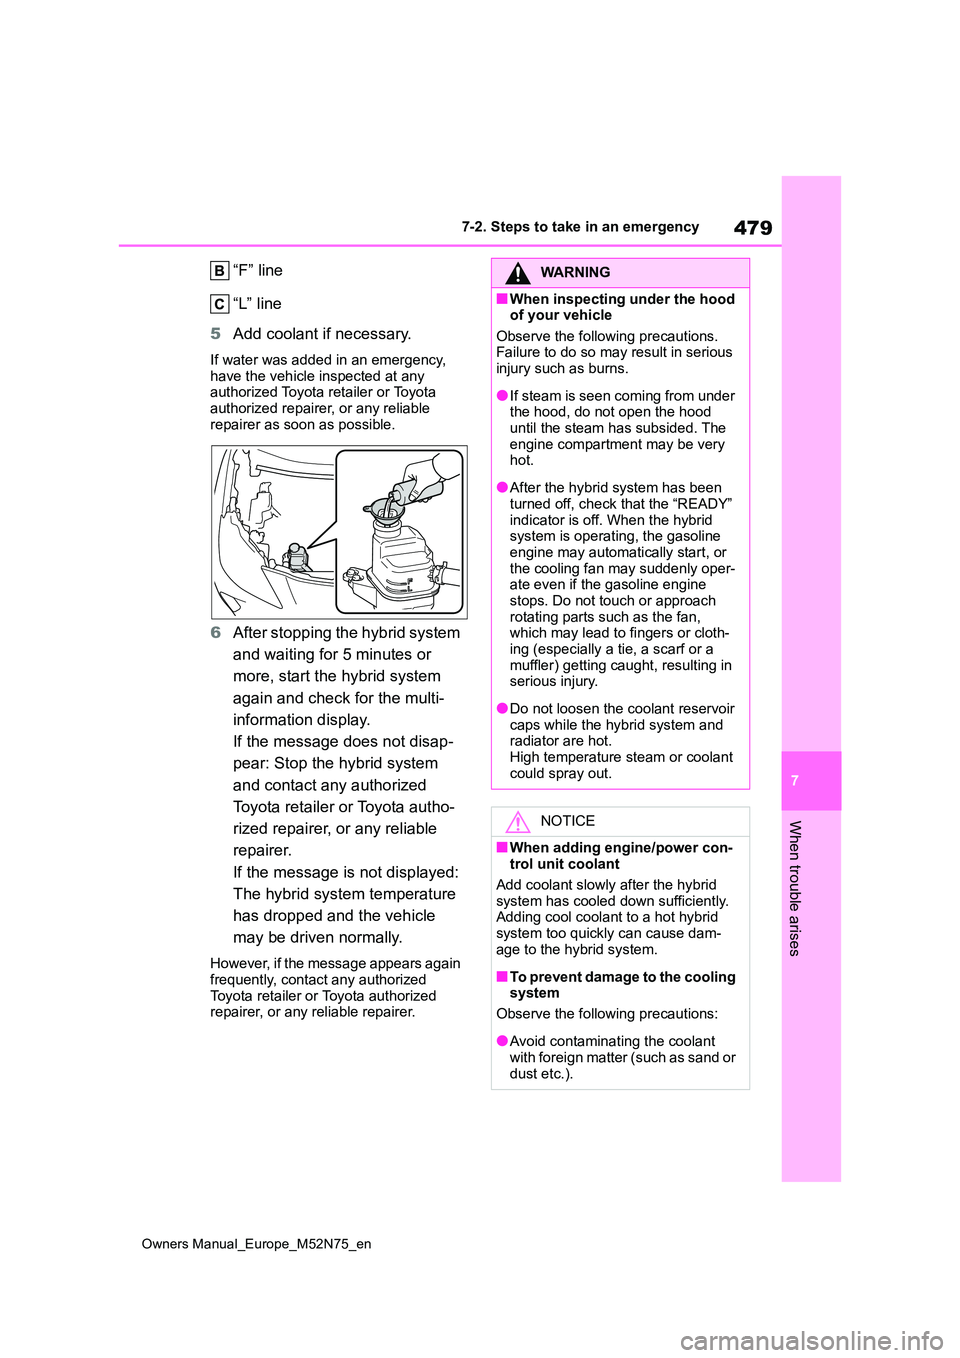 TOYOTA YARIS CROSS 2023 Service Manual 479
7
Owners Manual_Europe_M52N75_en
7-2. Steps to take in an emergency
When trouble arises
“F” line 
“L” line 
5 Add coolant if necessary.
If water was added in an emergency,  have the vehicl